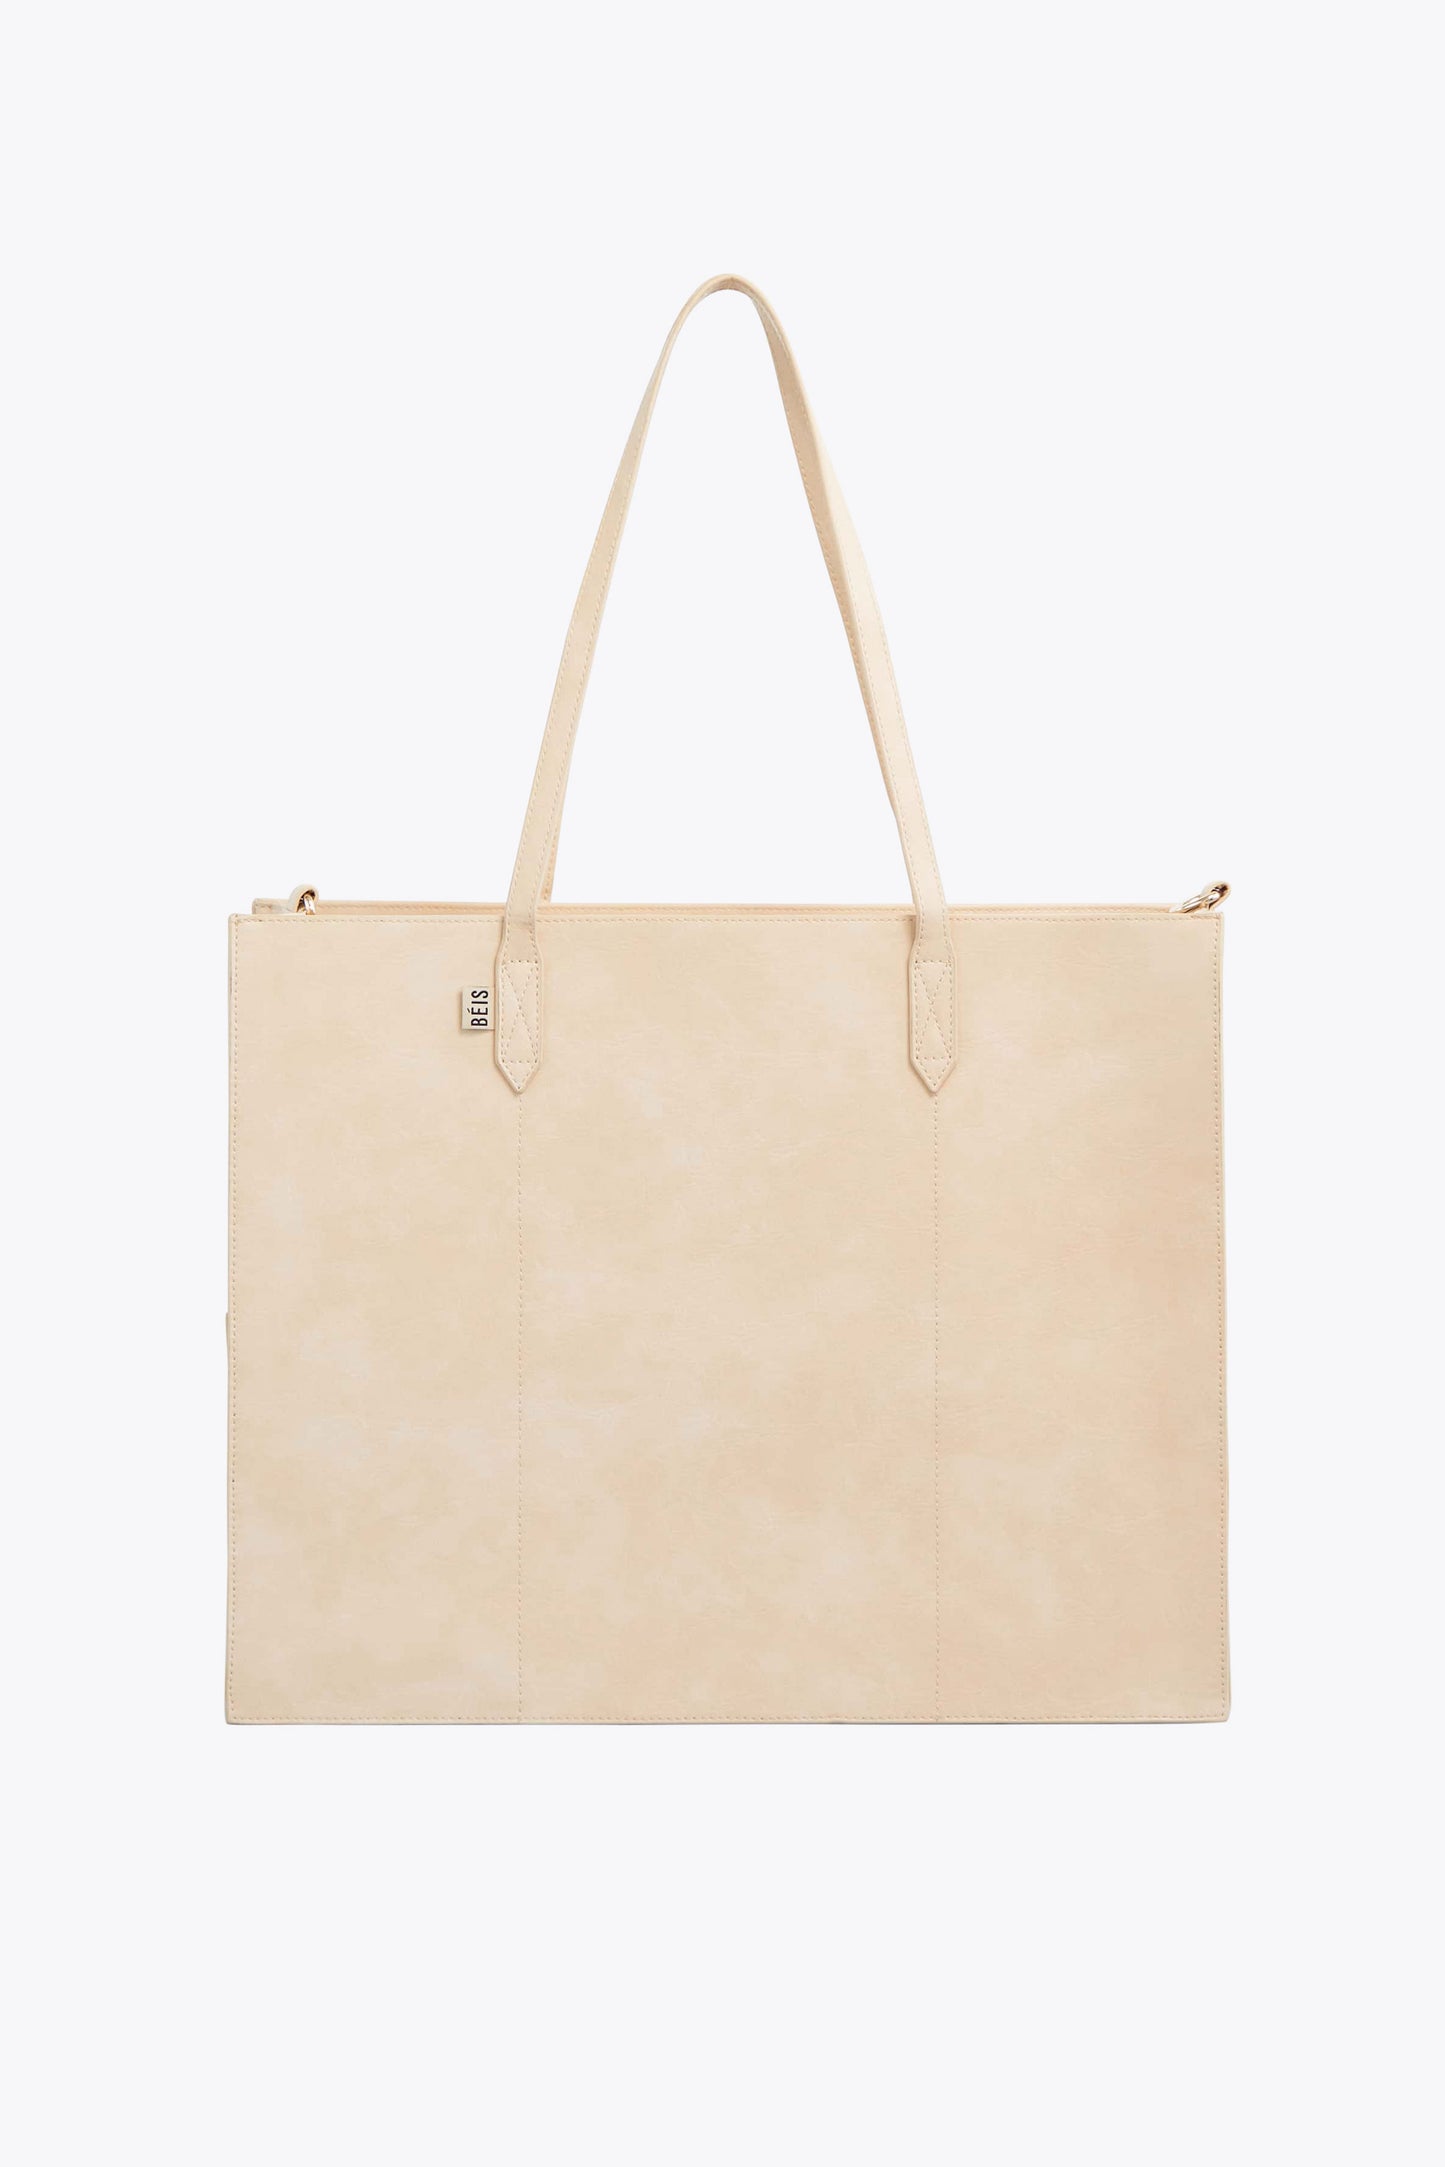 10 Designer Tote Bags That Can Fit Your Laptop